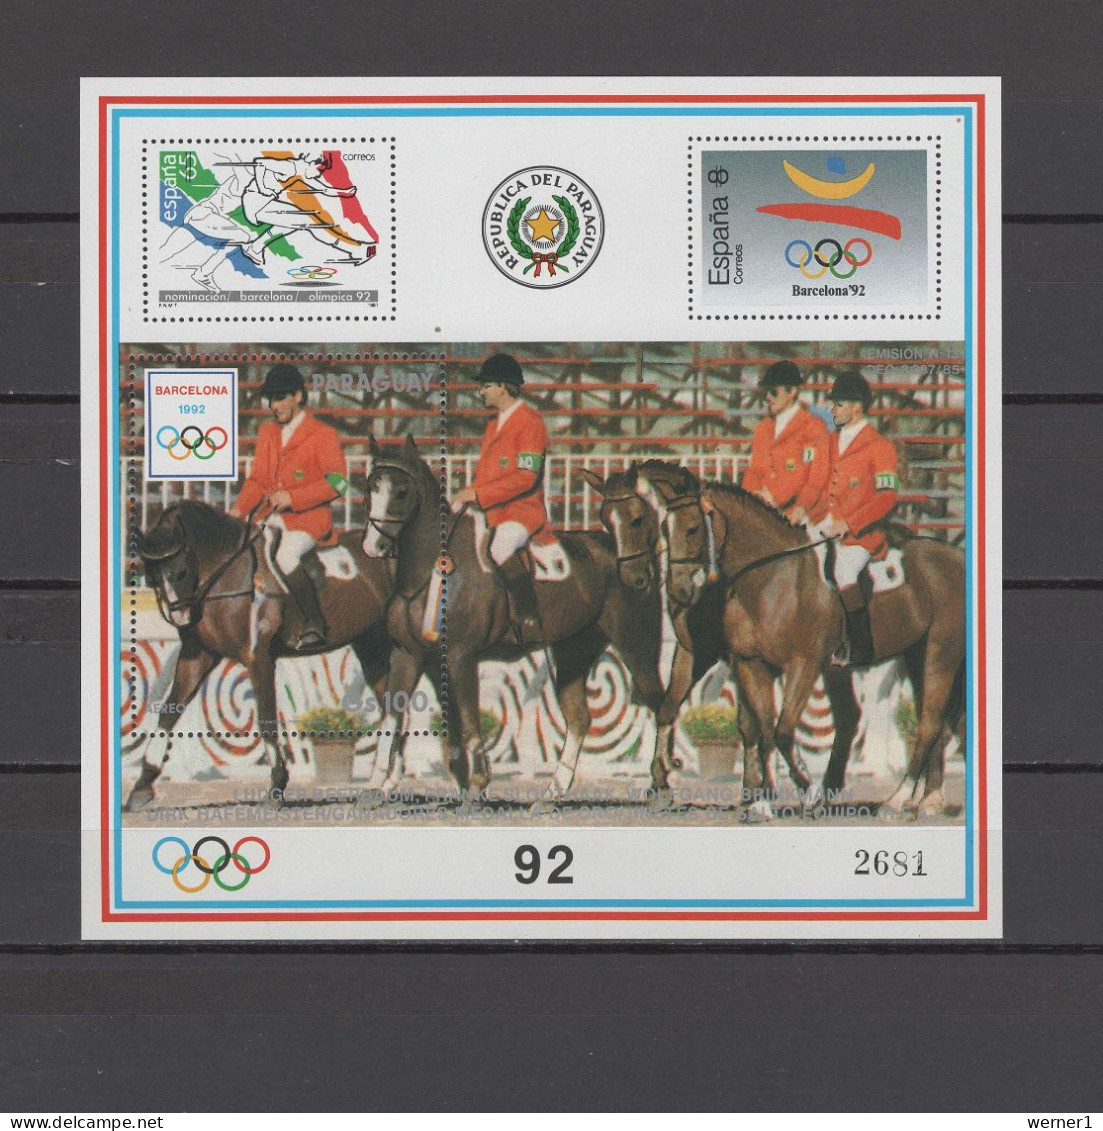 Paraguay 1990 Olympic Games Barcelona, Equestrian S/s With White Border MNH - Ete 1992: Barcelone